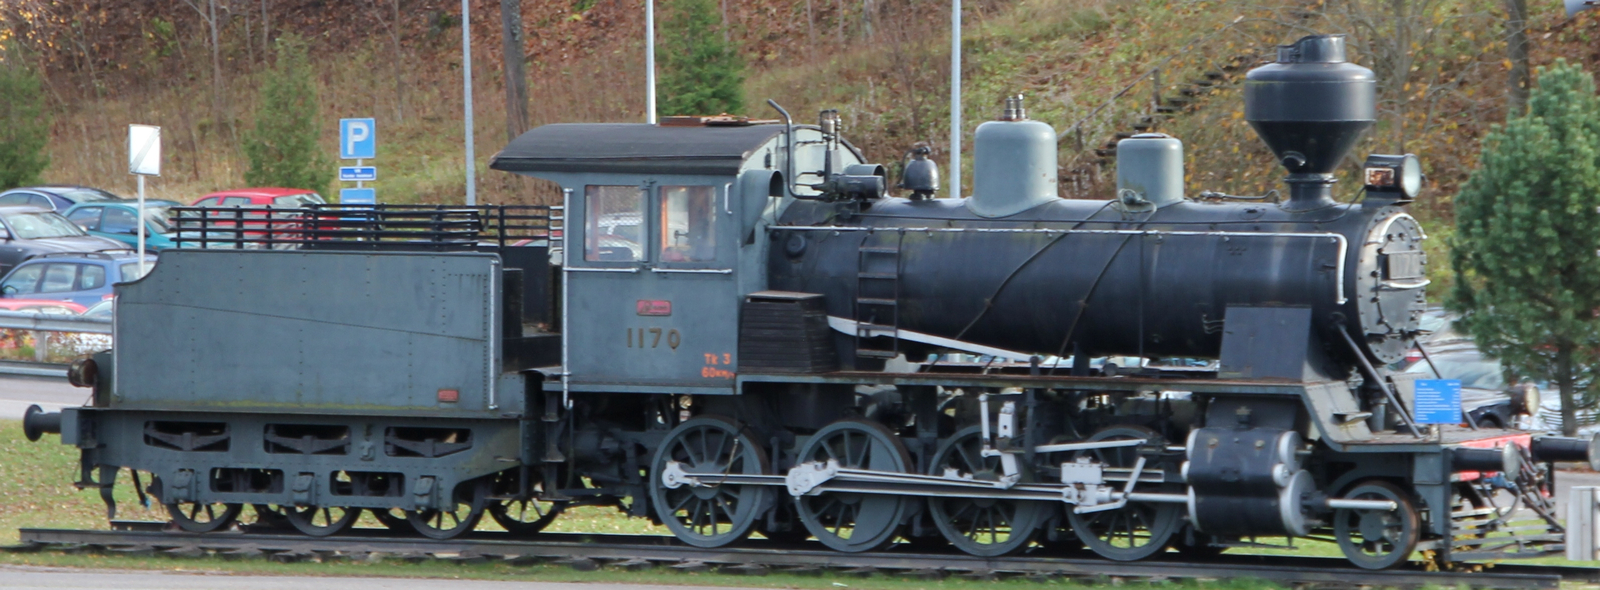 The last built no. 1170 from 1953 in October 2013 in Karjaalla